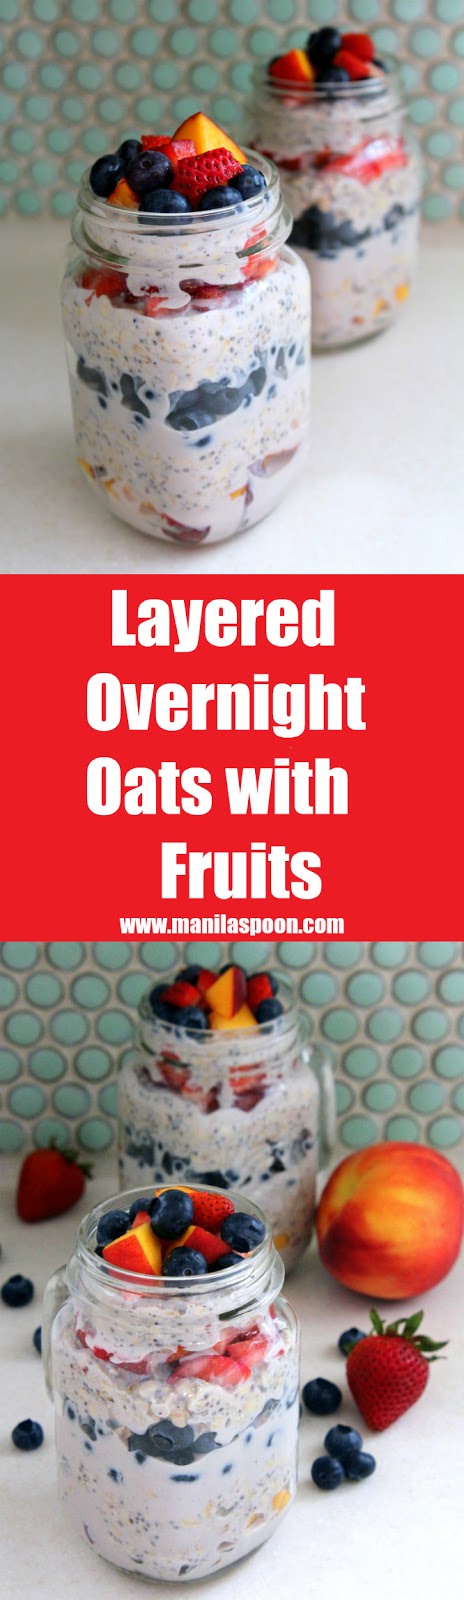 Make it the night before and wake up with a very tasty breakfast! Overnight flavored oatmeal, sweetened with a little honey and layered with fruits - healthy and delicious! | manilaspoon.com